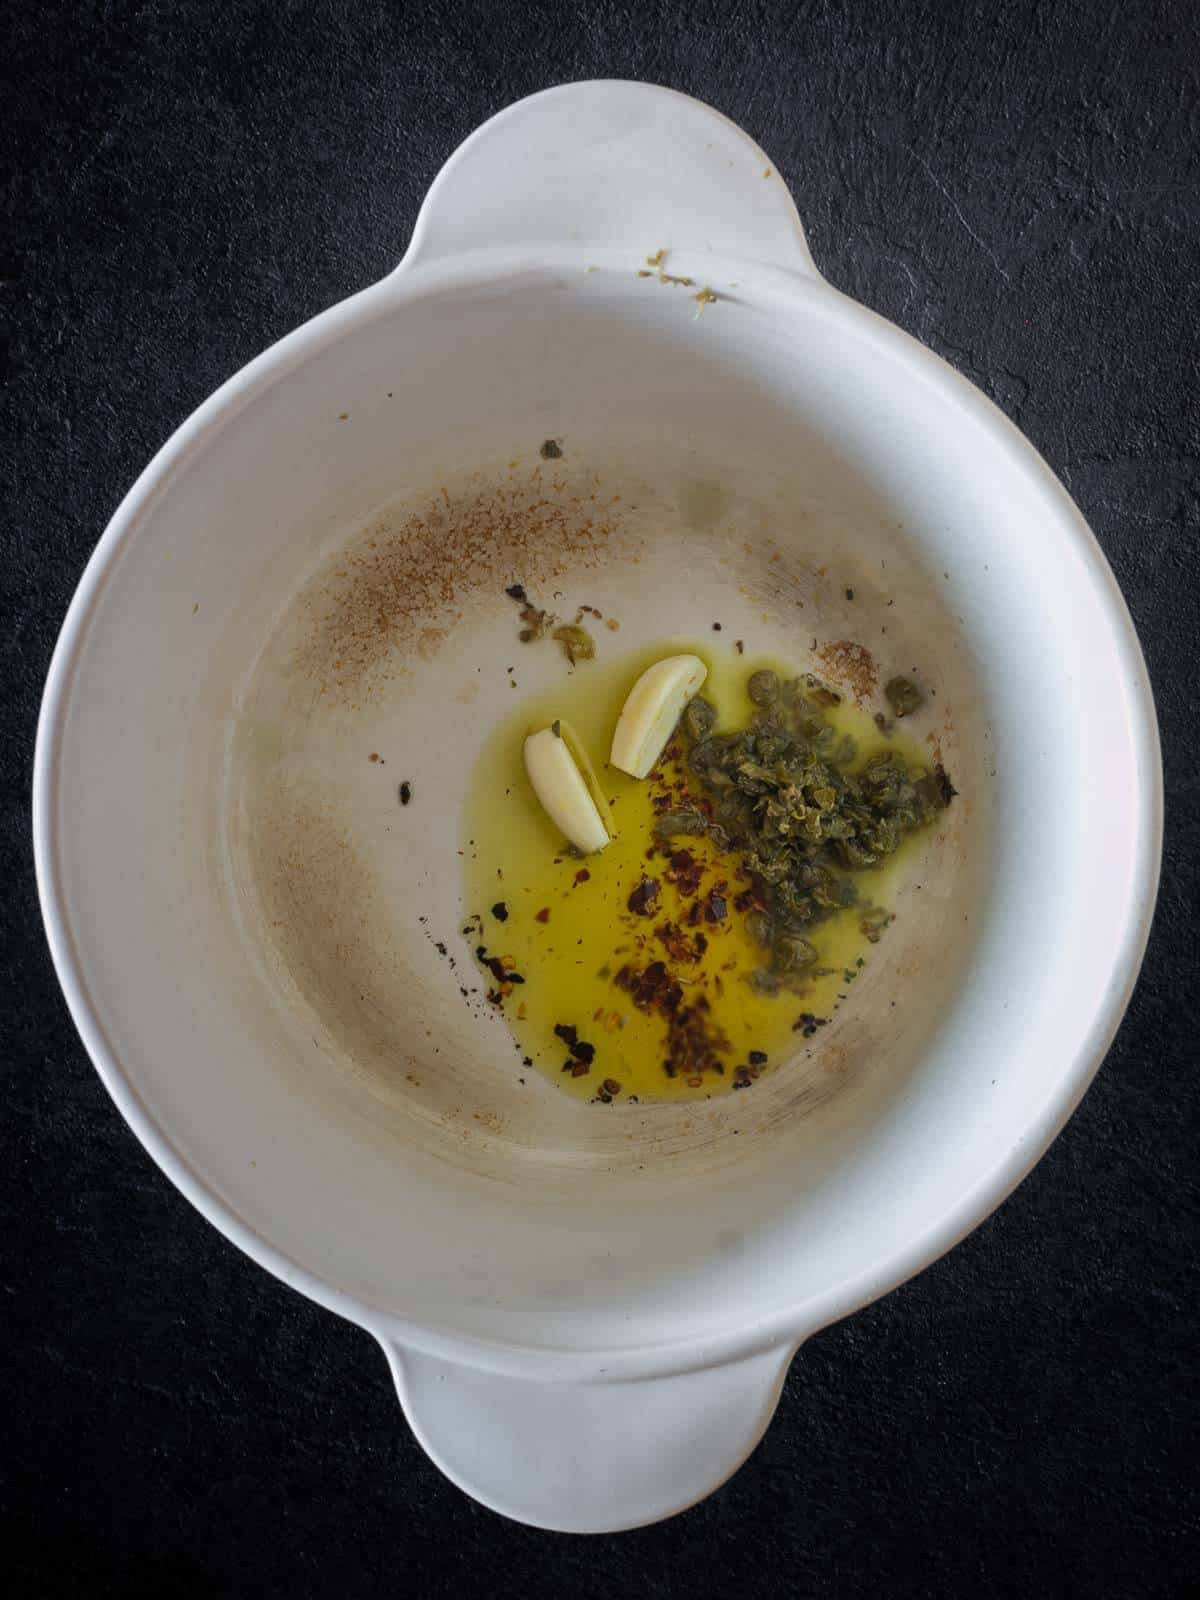 infuse olive oil with garlic, chili flakes and capers